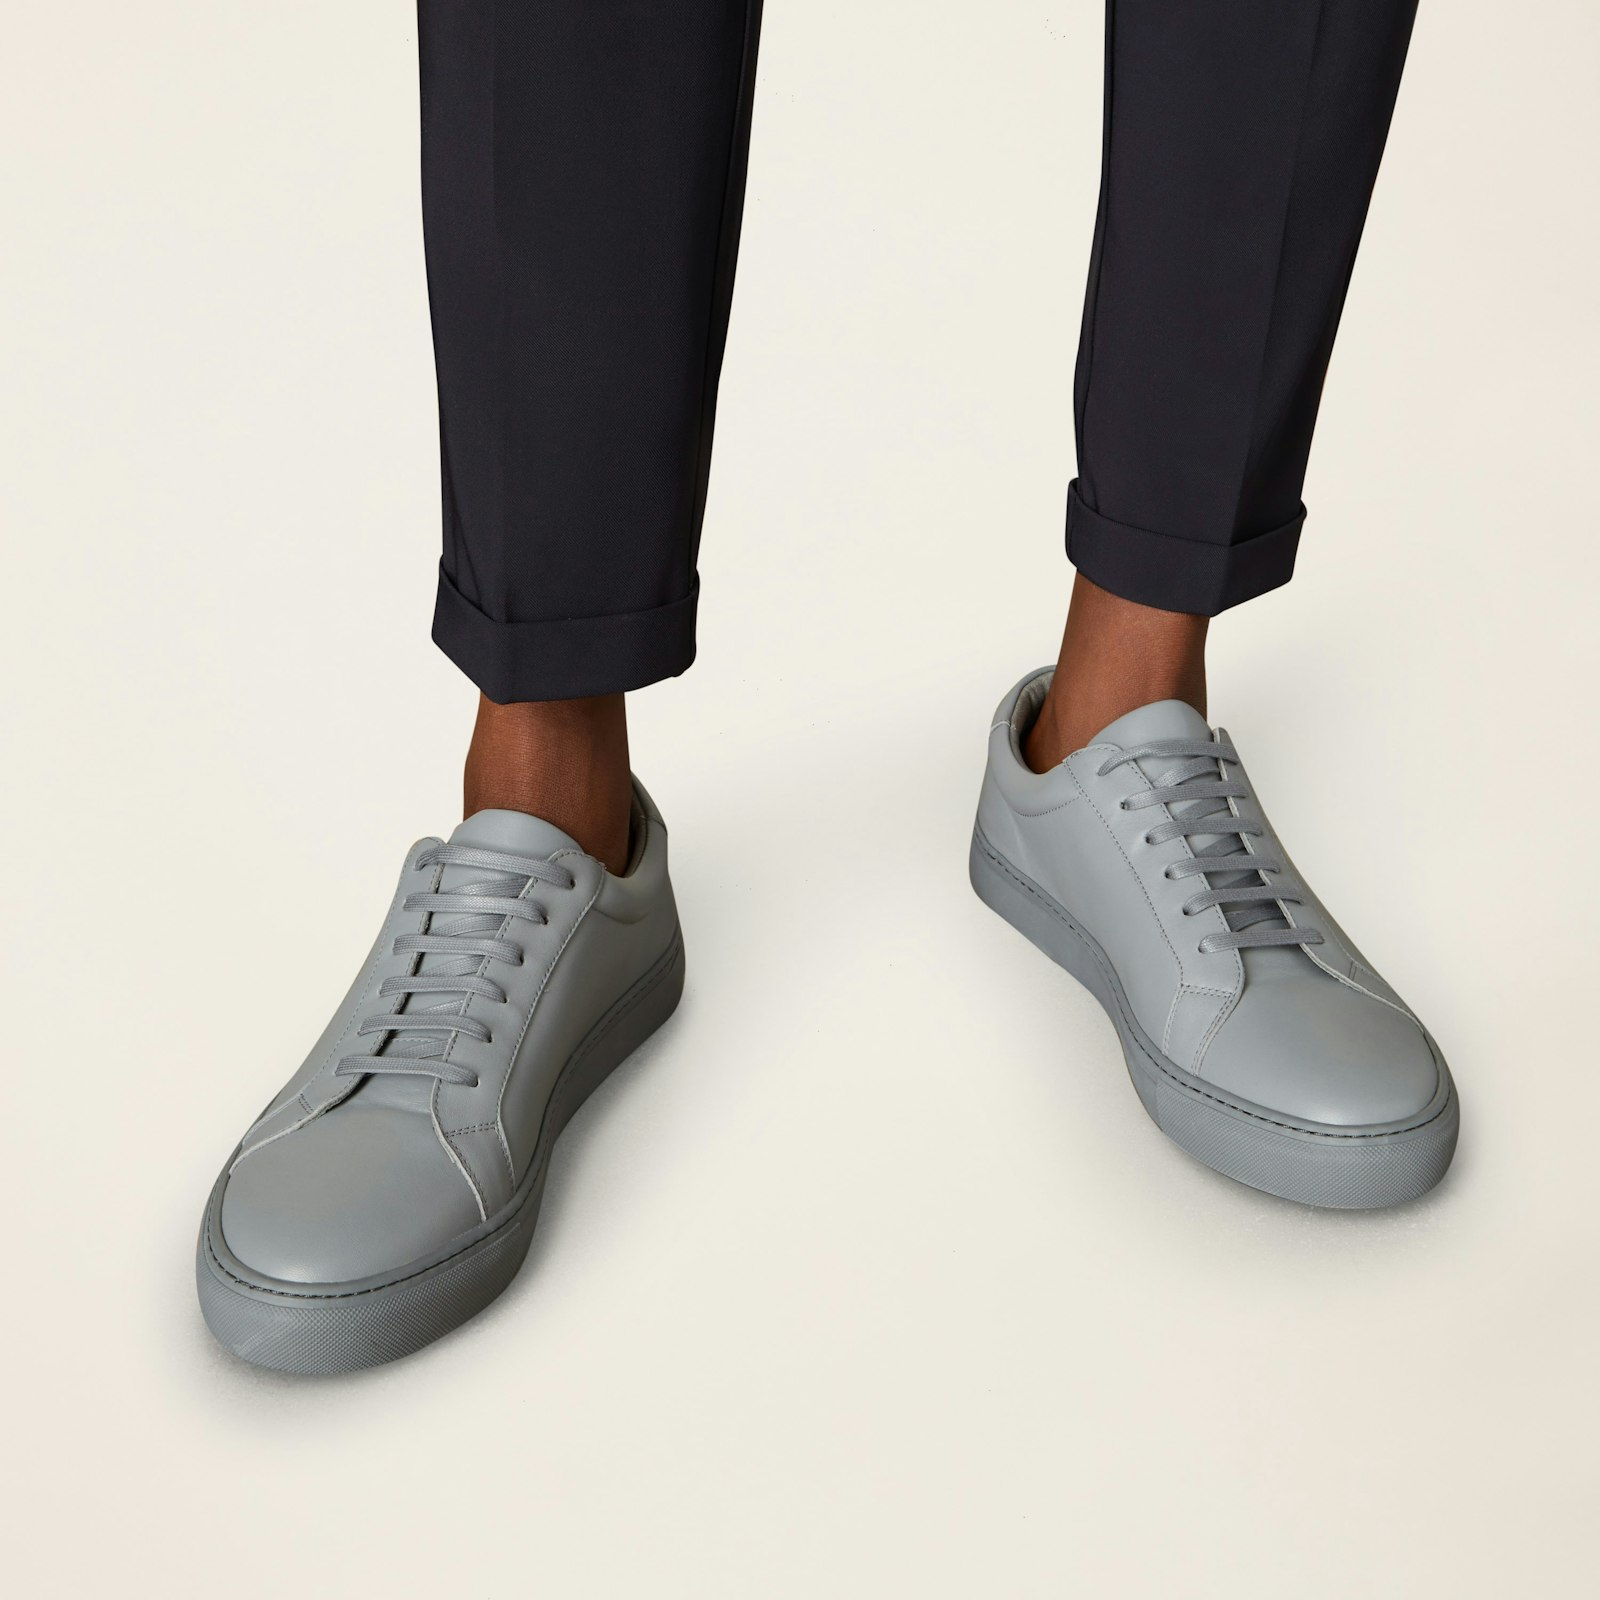 Candace_LeatherSneaker_Graphite_Figure_CropScale 1.jpg